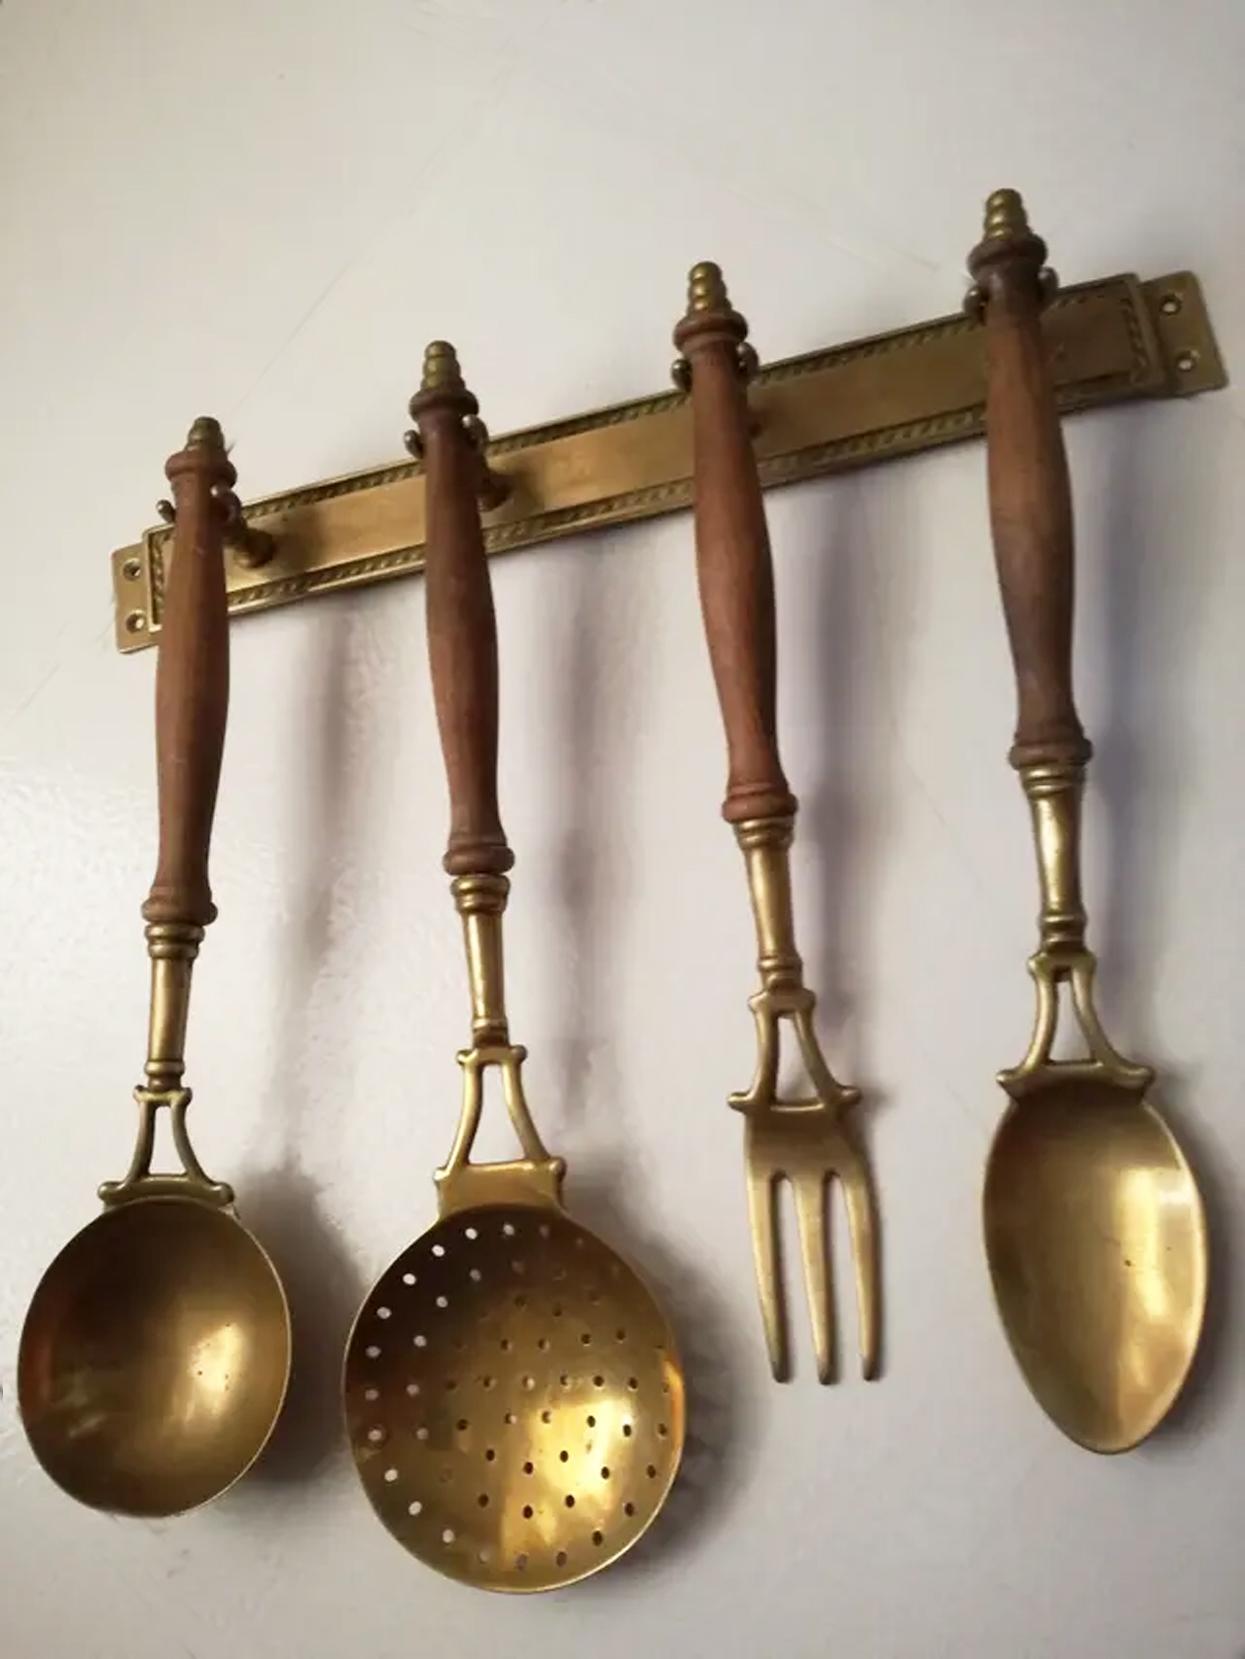 Spanish Old Kitchen Utensils Made of Brass with Hanging Bar, Early 20th Century